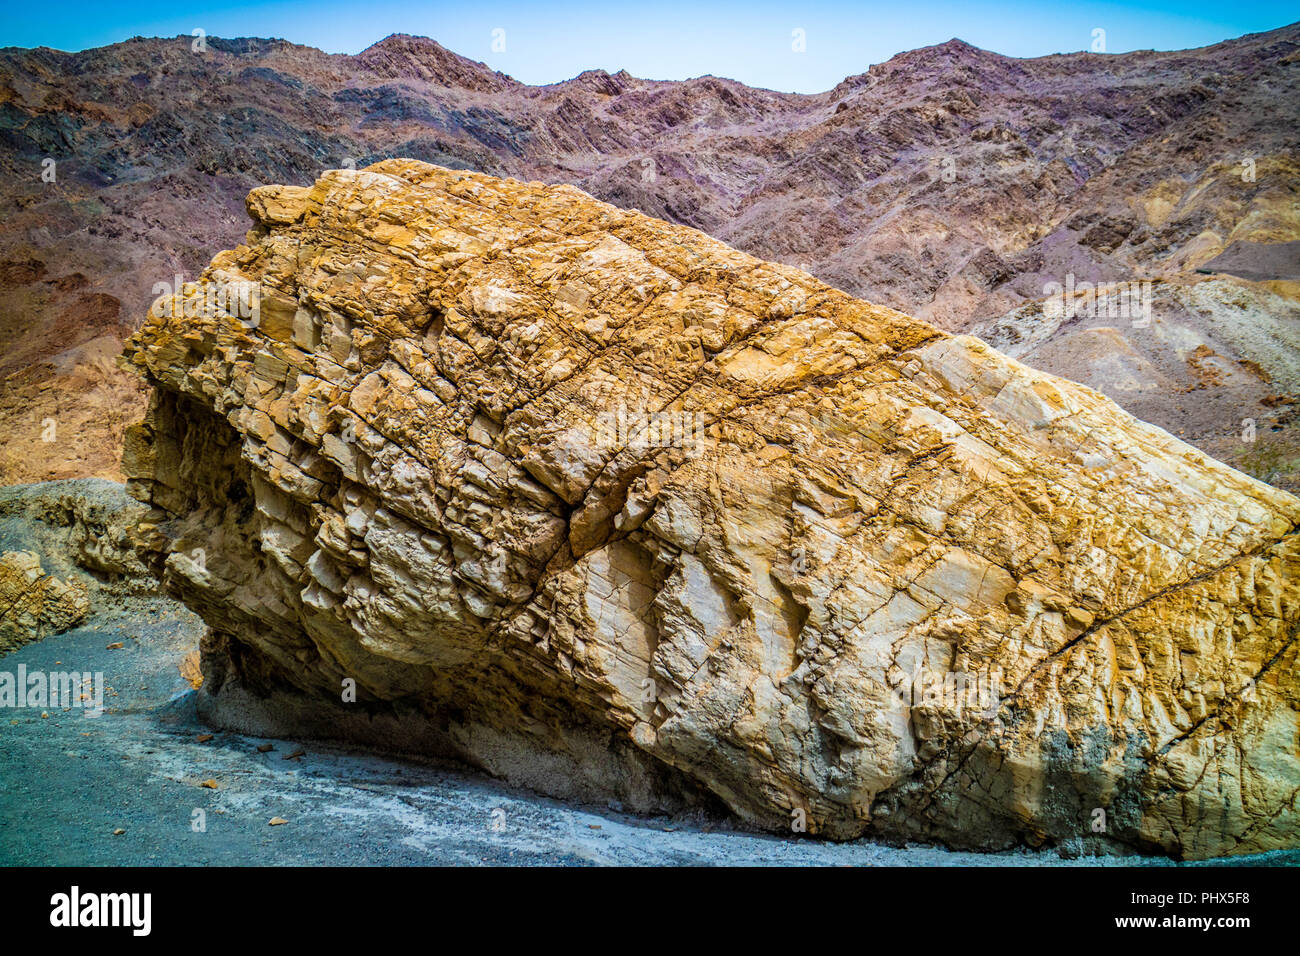 A big rock in Death Valley National Park Stock Photo